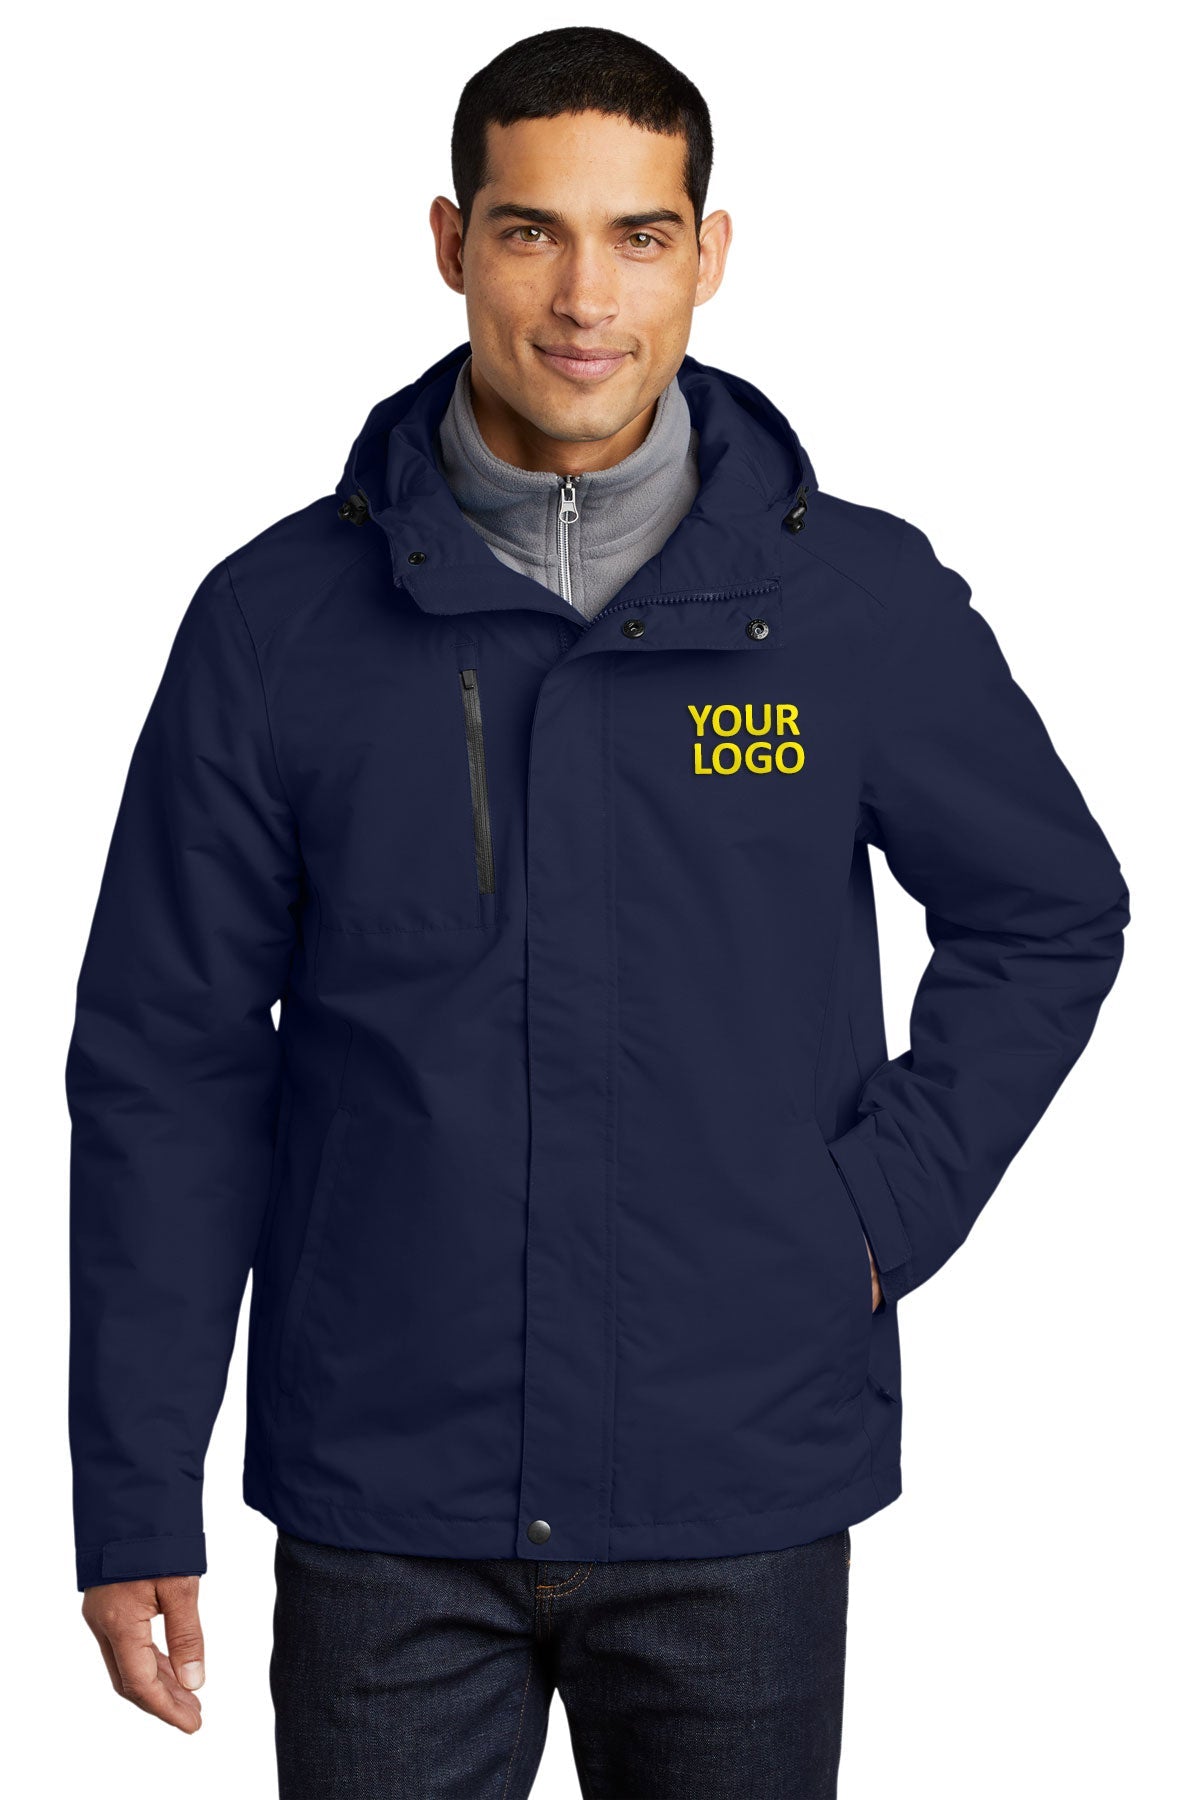 Port Authority True Navy J331 team jackets embroidered